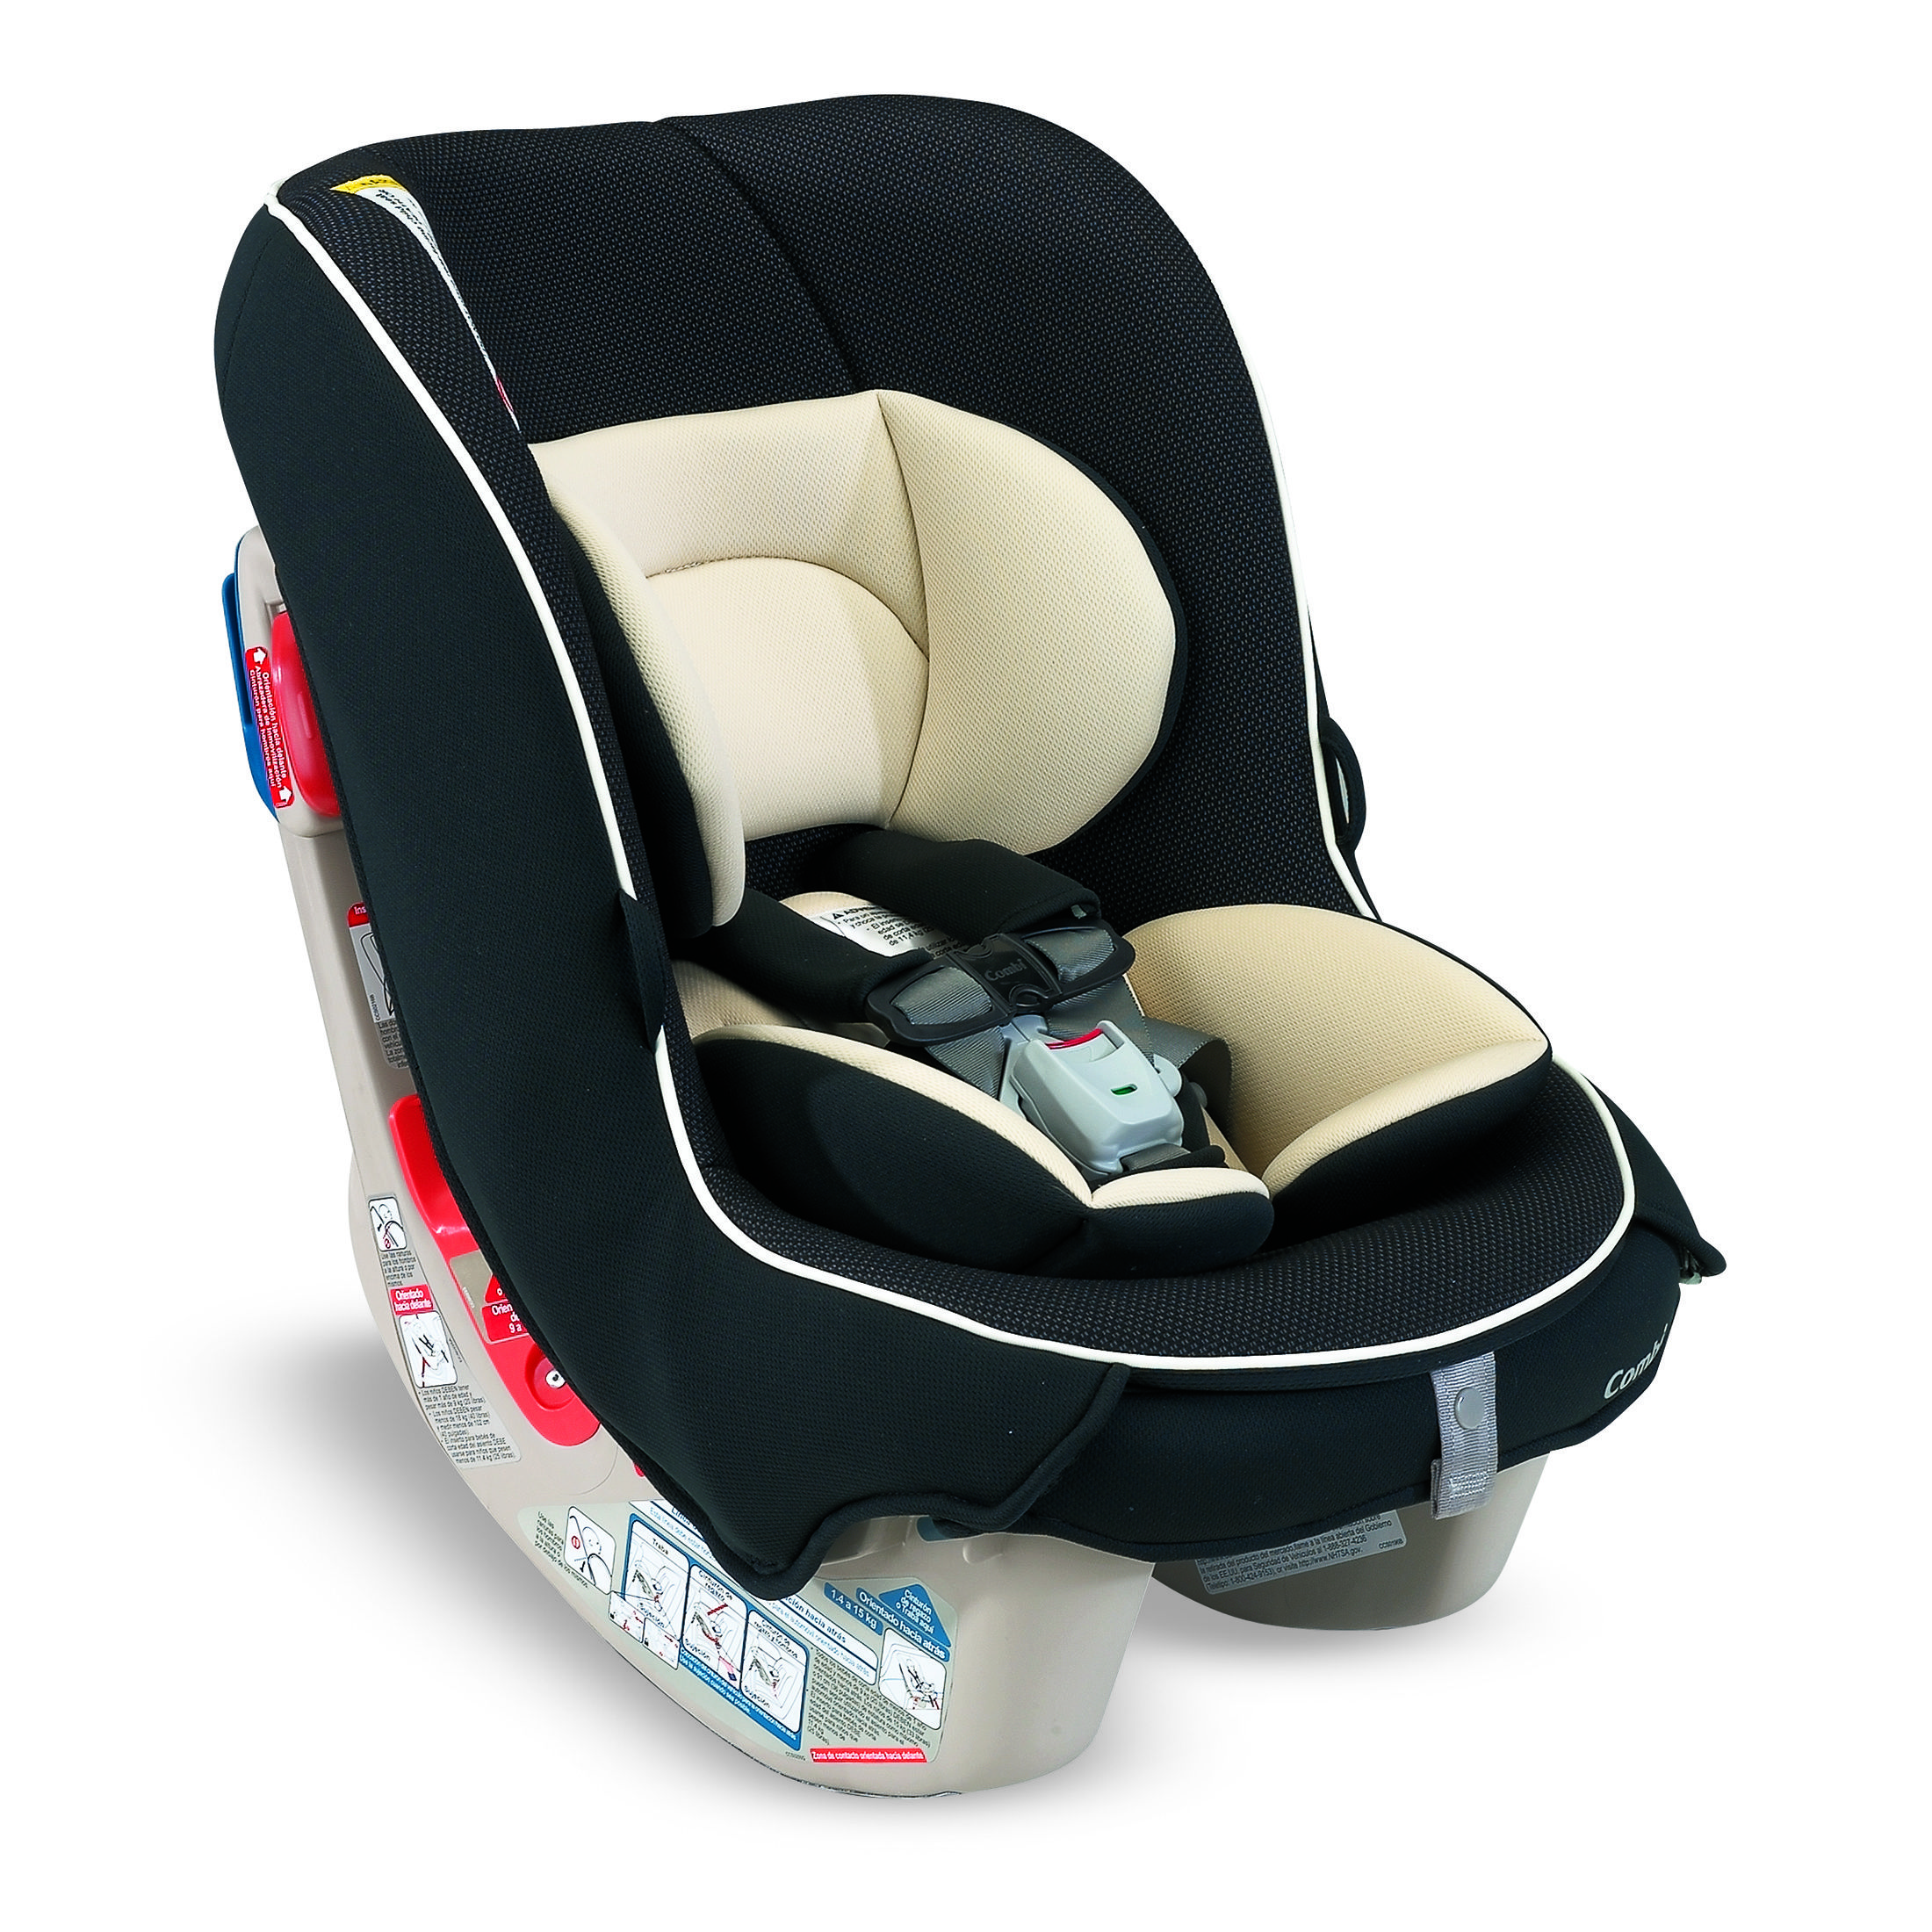 5 Best Convertible Car Seats for Your Kids